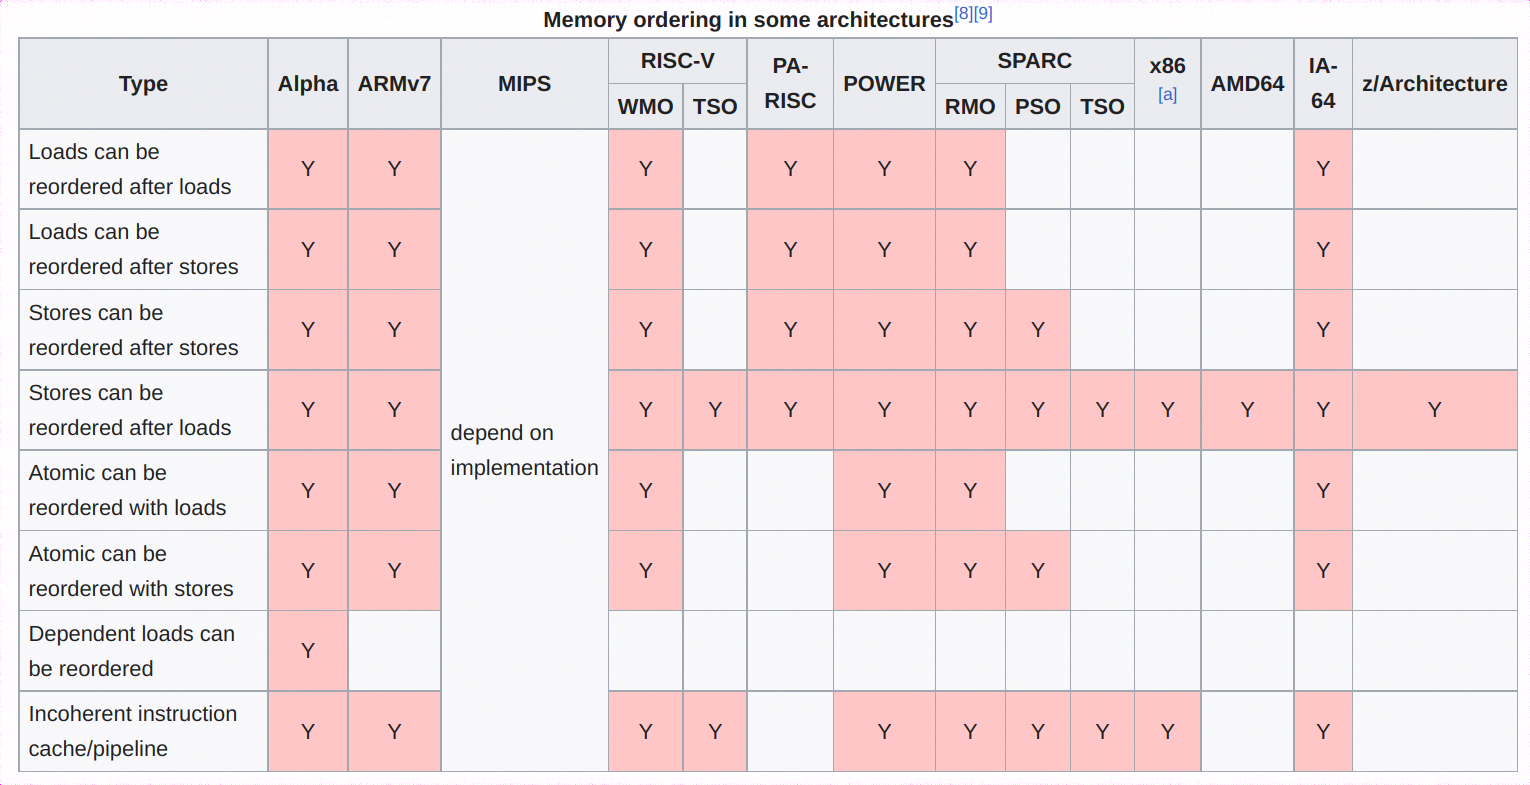 memory ordering in some architectures